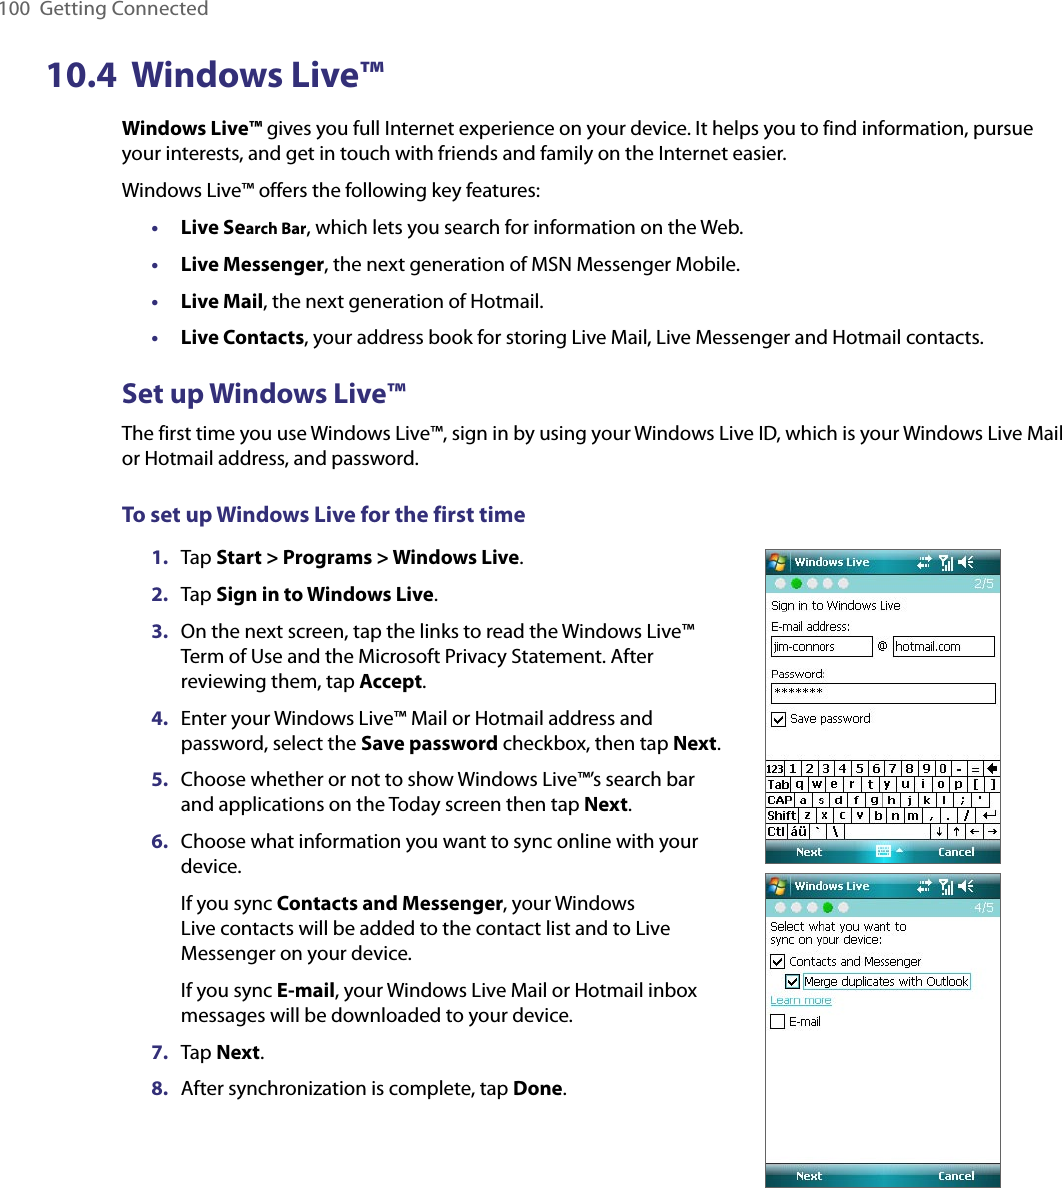 100  Getting Connected10.4  Windows Live™Windows Live™ gives you full Internet experience on your device. It helps you to find information, pursue your interests, and get in touch with friends and family on the Internet easier.Windows Live™ offers the following key features:•  Live Search Bar, which lets you search for information on the Web.•  Live Messenger, the next generation of MSN Messenger Mobile.•  Live Mail, the next generation of Hotmail.•  Live Contacts, your address book for storing Live Mail, Live Messenger and Hotmail contacts.Set up Windows Live™The first time you use Windows Live™, sign in by using your Windows Live ID, which is your Windows Live Mail or Hotmail address, and password.To set up Windows Live for the first time1.  Tap Start &gt; Programs &gt; Windows Live.2.  Tap Sign in to Windows Live.3.  On the next screen, tap the links to read the Windows Live™ Term of Use and the Microsoft Privacy Statement. After reviewing them, tap Accept.4.  Enter your Windows Live™ Mail or Hotmail address and password, select the Save password checkbox, then tap Next.5.  Choose whether or not to show Windows Live™’s search bar and applications on the Today screen then tap Next.6.  Choose what information you want to sync online with your device.If you sync Contacts and Messenger, your Windows Live contacts will be added to the contact list and to Live Messenger on your device.If you sync E-mail, your Windows Live Mail or Hotmail inbox messages will be downloaded to your device.7.  Tap Next.8.  After synchronization is complete, tap Done.